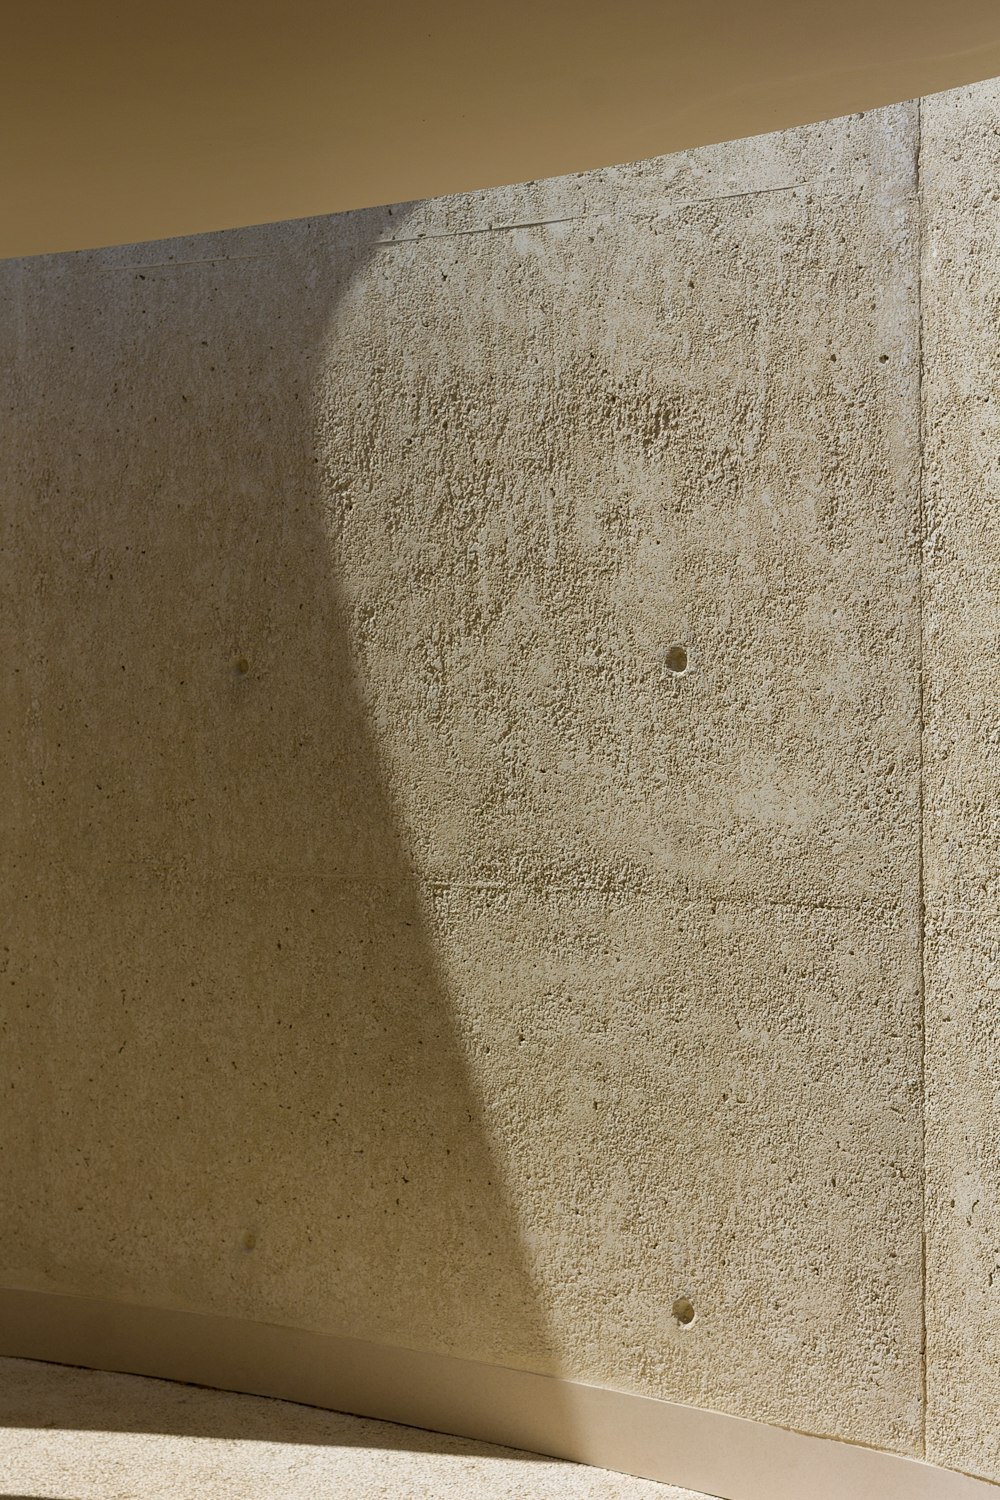 the shadow of a person sitting on a bench